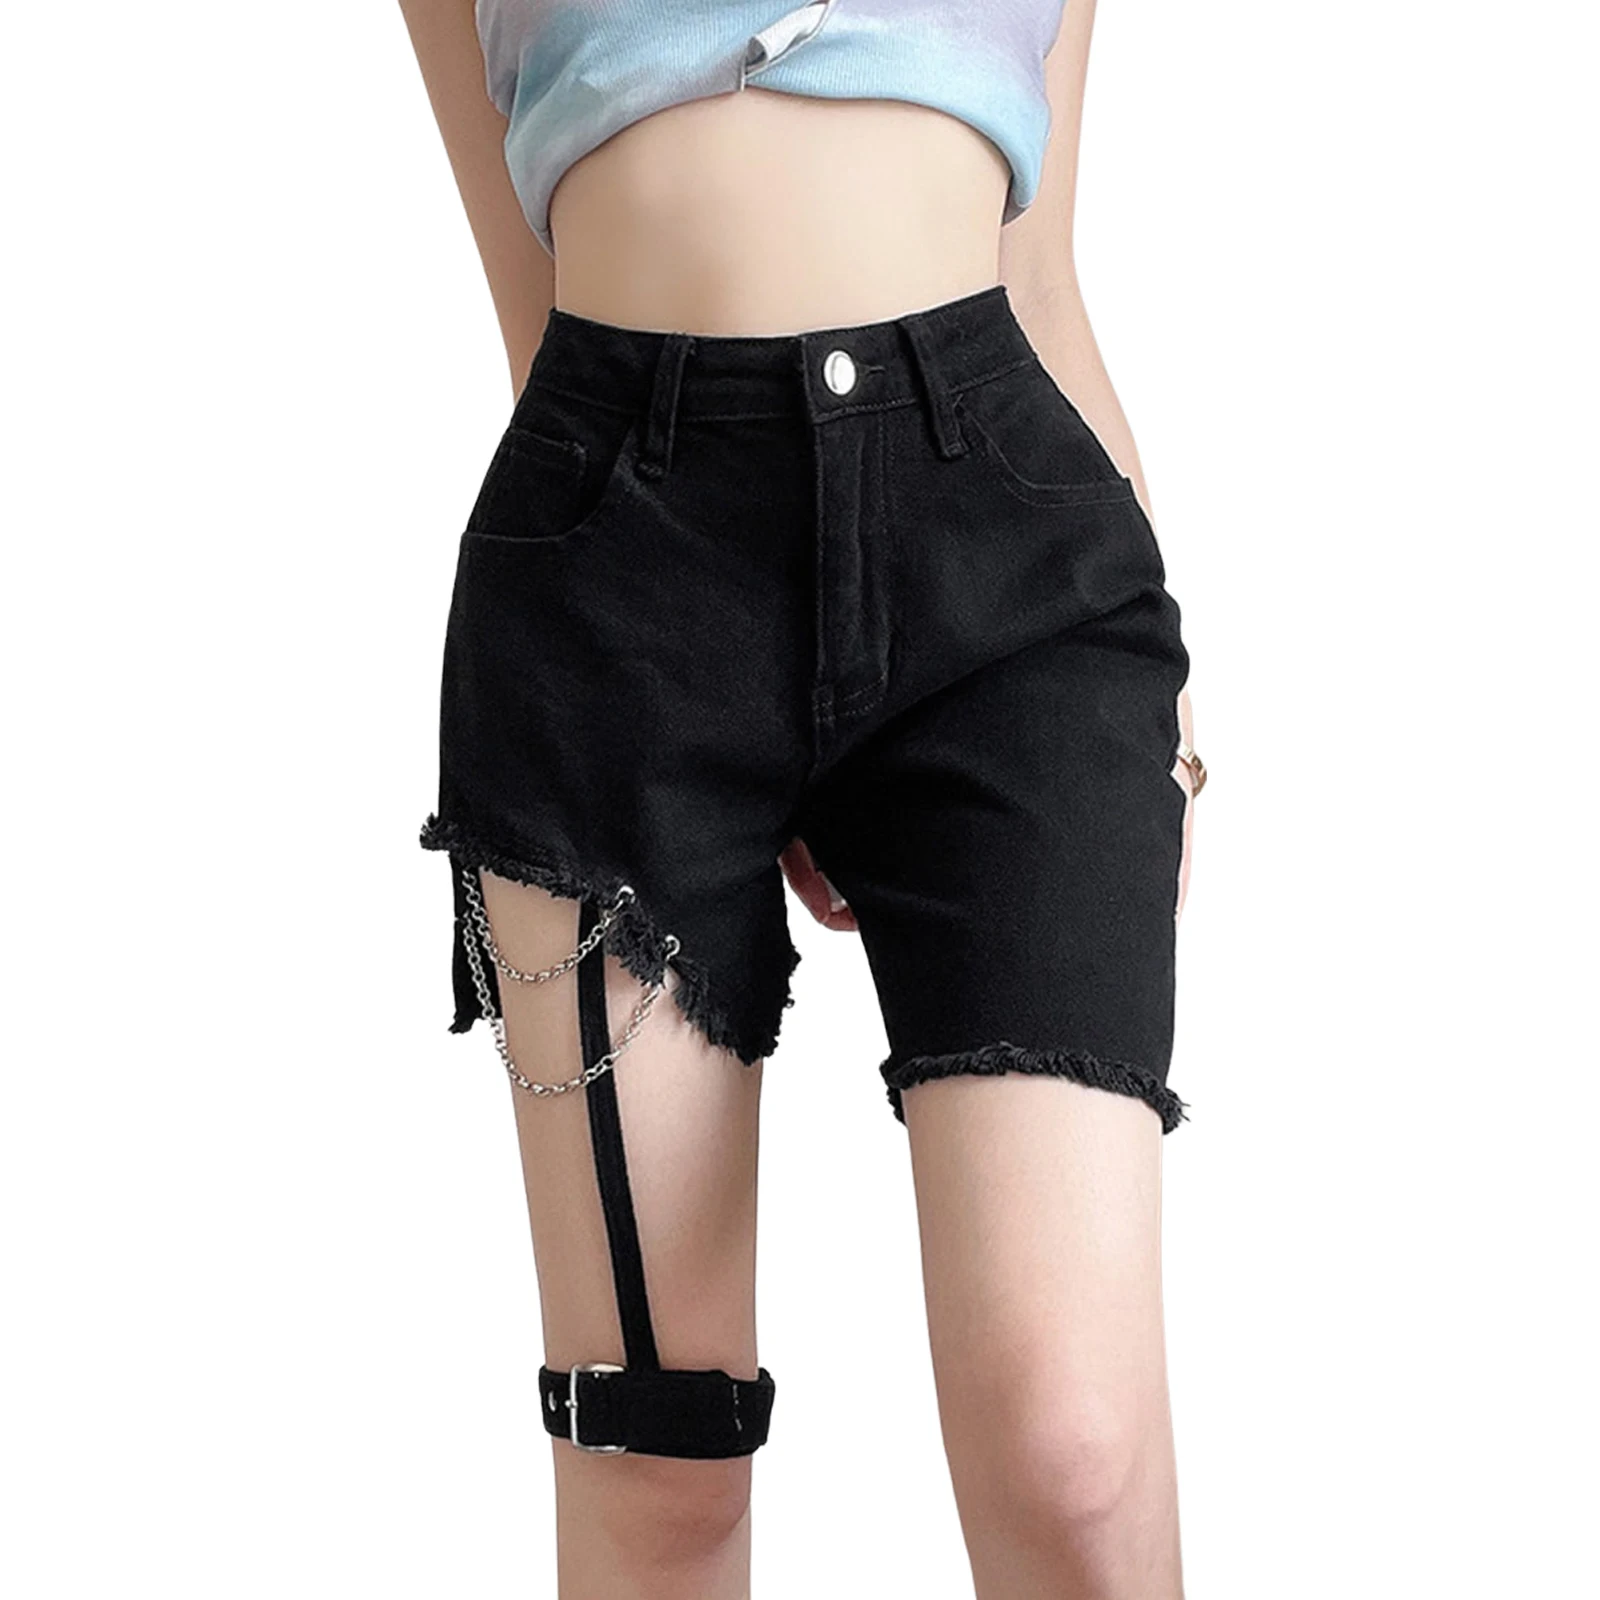 

IMCUTE Gothic Chain Leg Loop High Waist Washed Jeans Girls Fashion Slim Frosted Frayed Denim Shorts Punk Street Buttocks Shorts